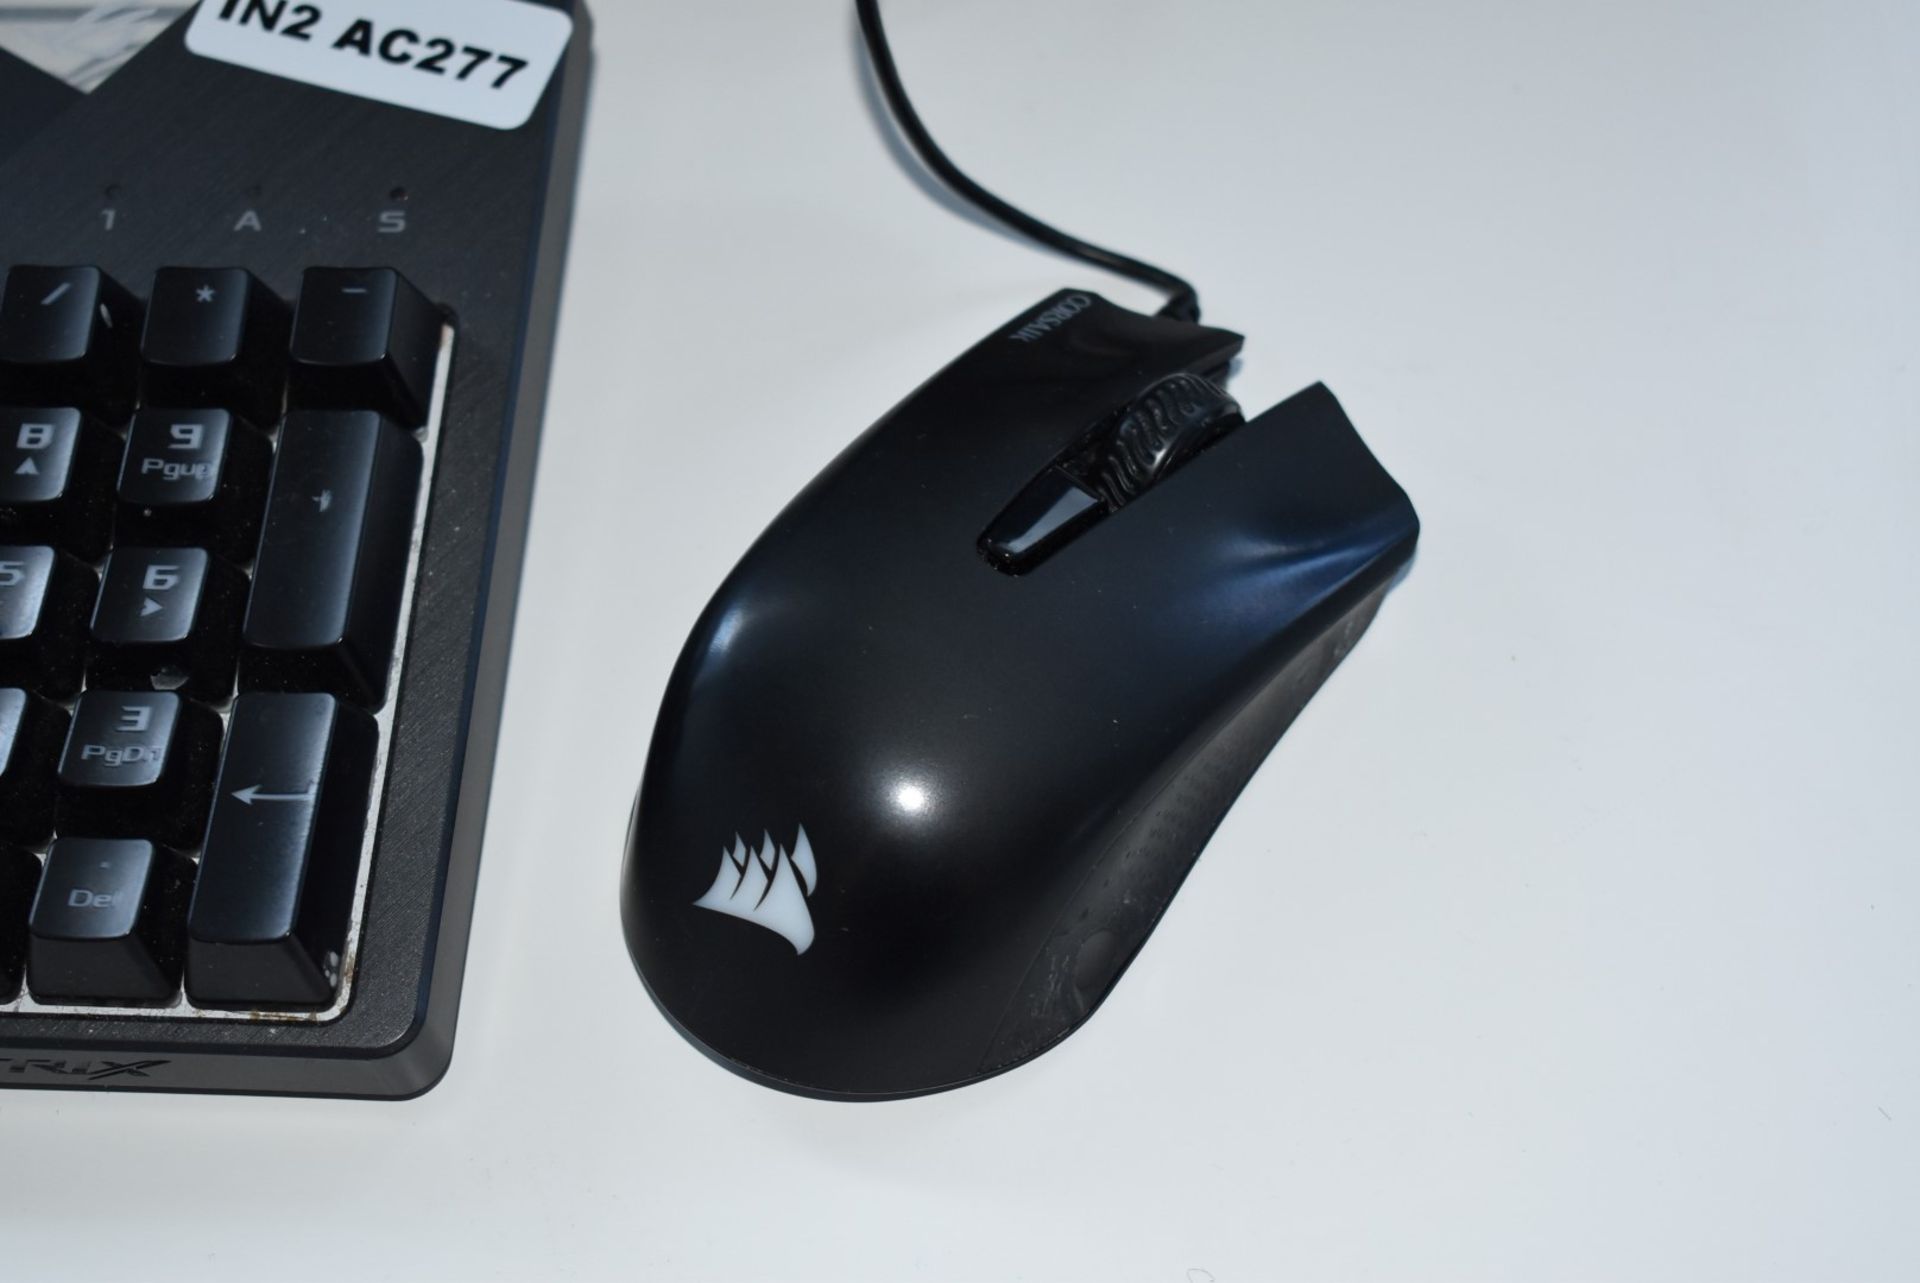 1 x Corsair XA01 Wired RGB Gaming Keyboard and Harpoon Mouse - Office Use Only - Image 4 of 6